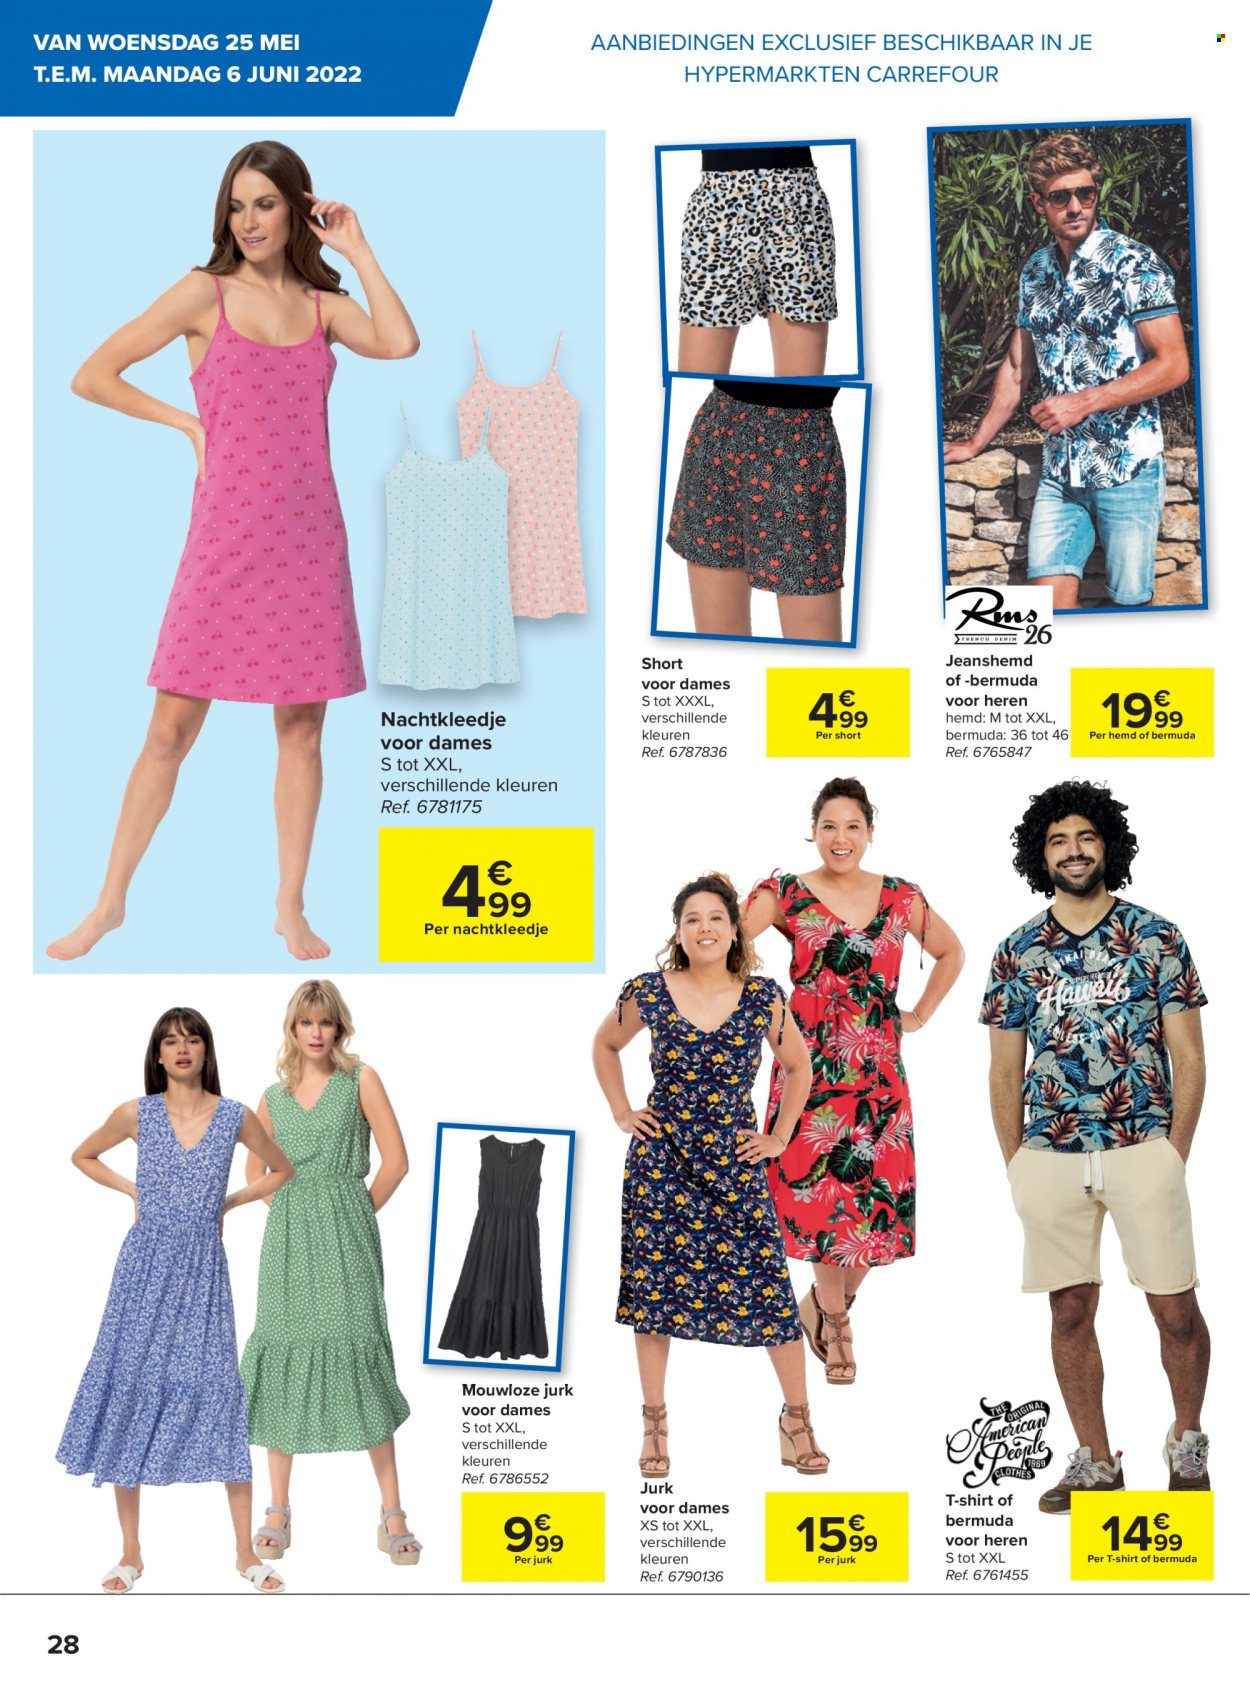 Catalogue Carrefour hypermarkt - 24.5.2022 - 30.5.2022. Page 28.